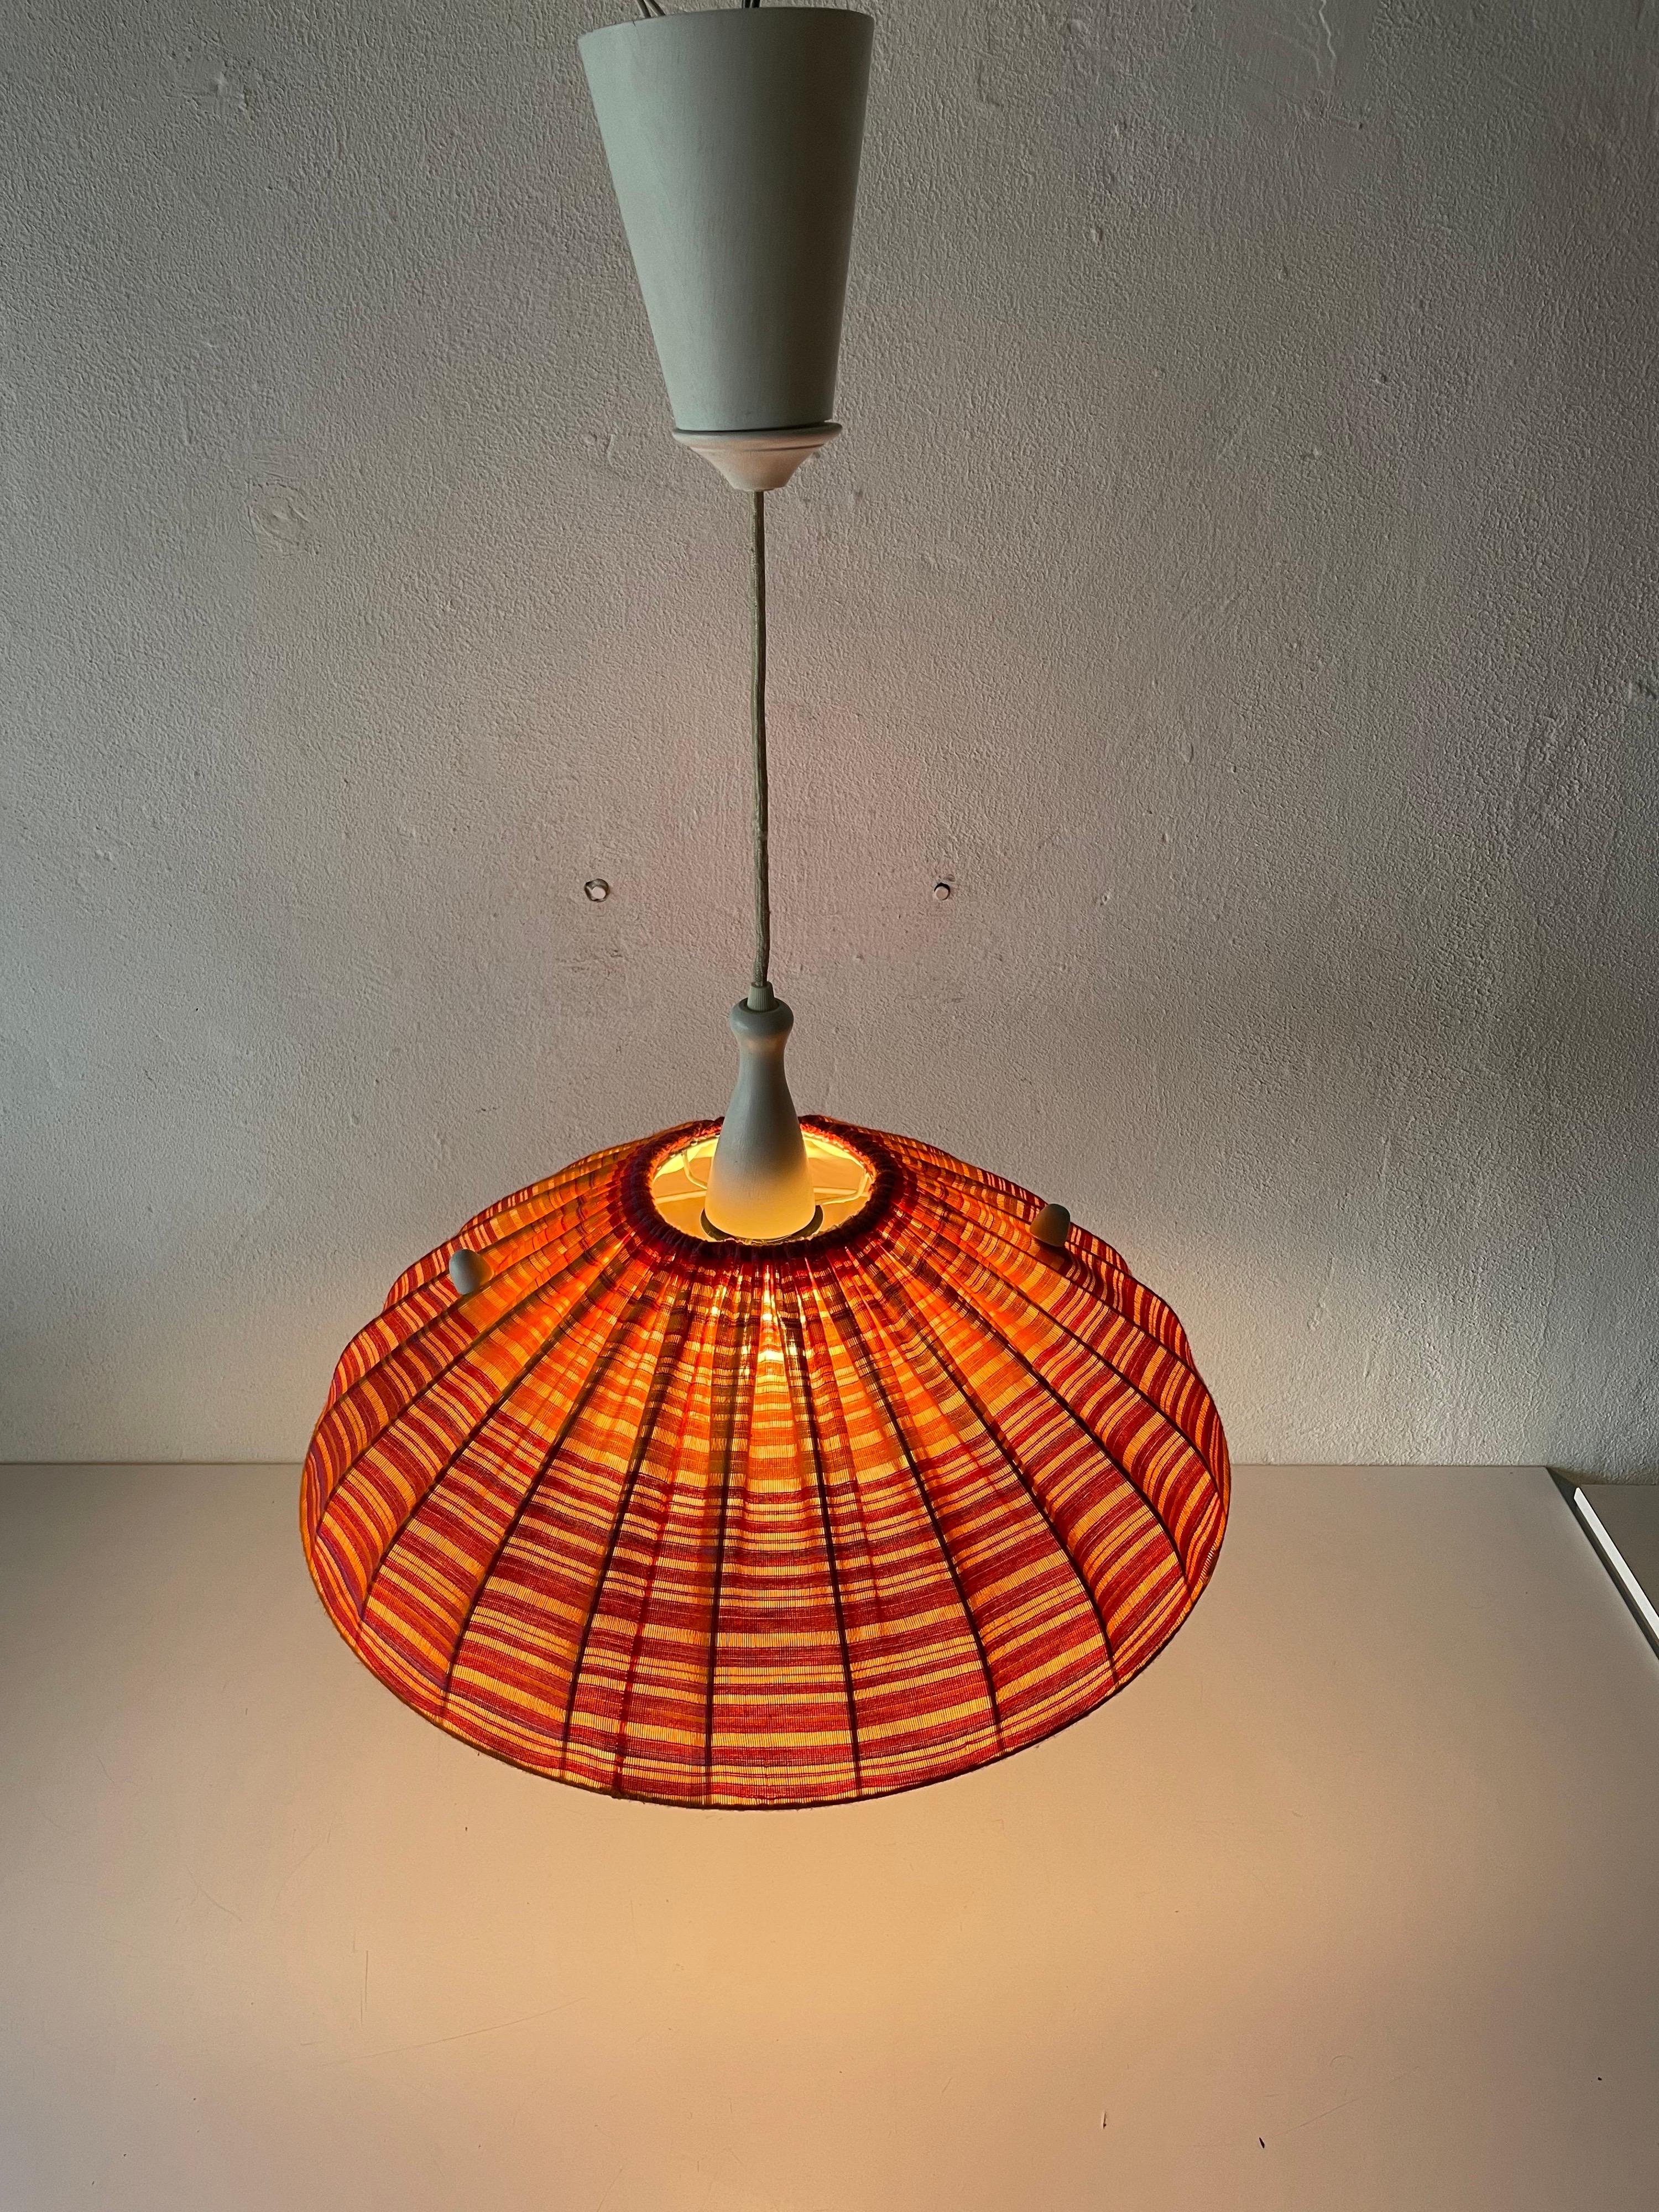 Fabric Shade & Wood Large Pendant Lamp by Temde, 1960s, Germany For Sale 7